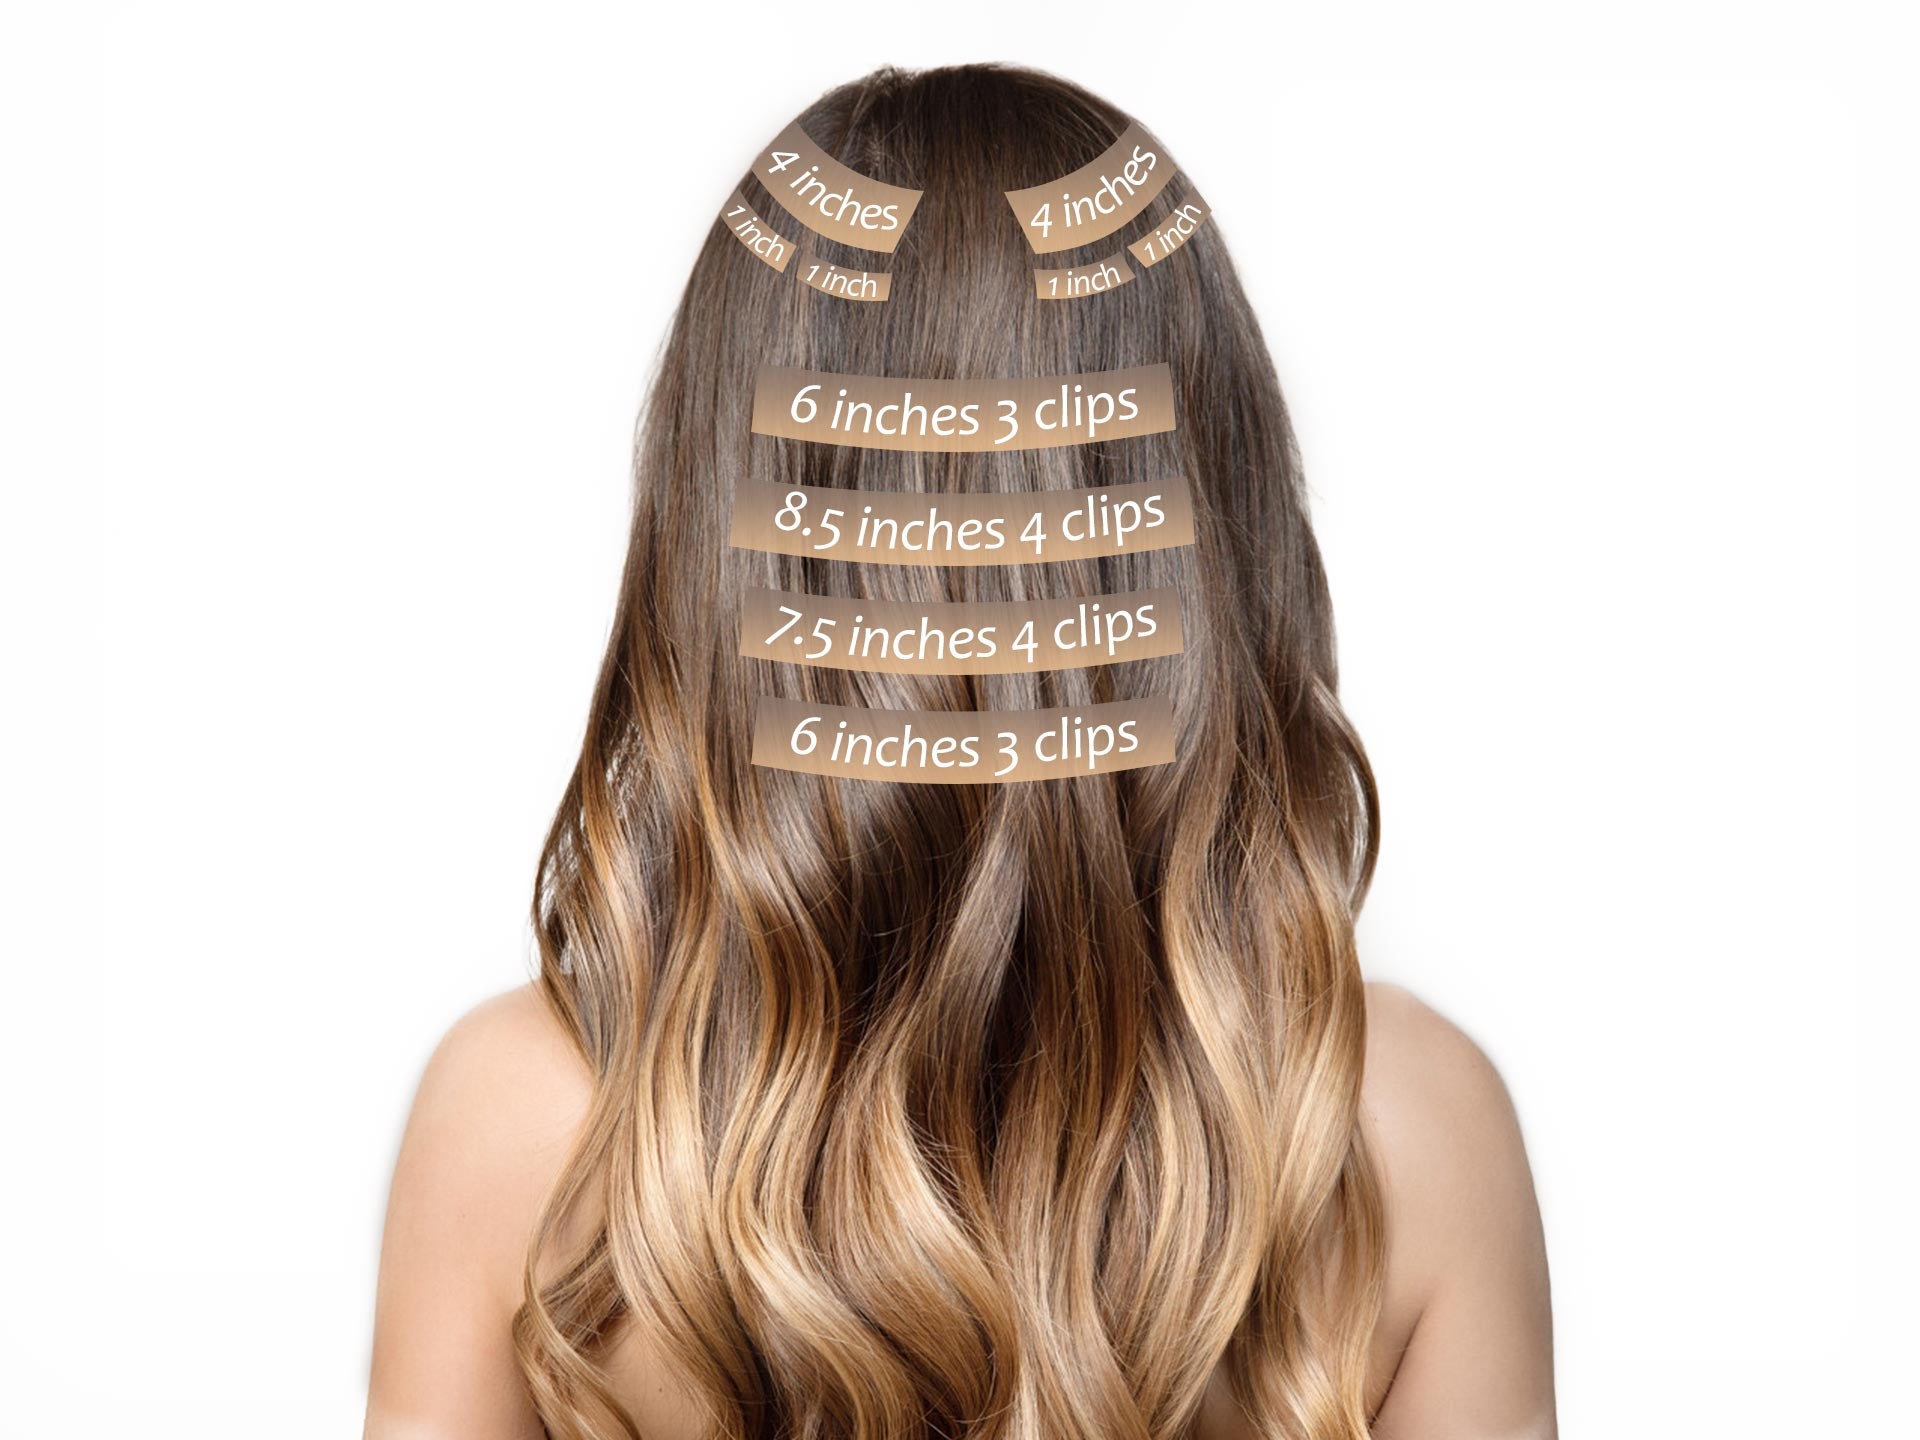 5. Clip-in Hair Extensions - wide 4